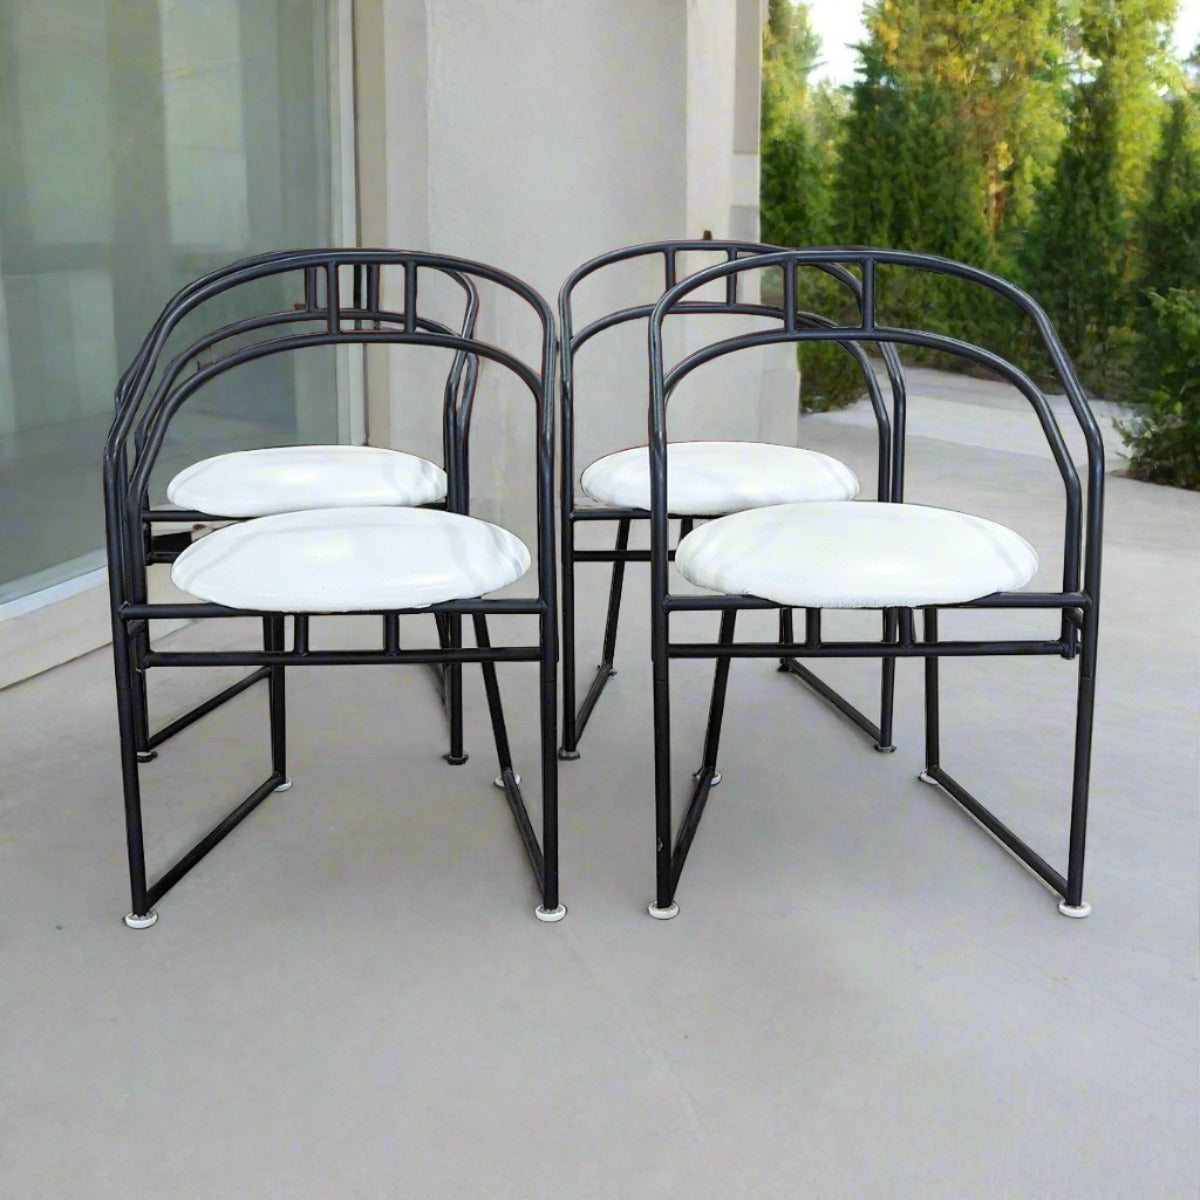 SET 4 Post Modern Black Metal Frame Dining Chairs by Cali-Style - Habitat Oakland ReStores